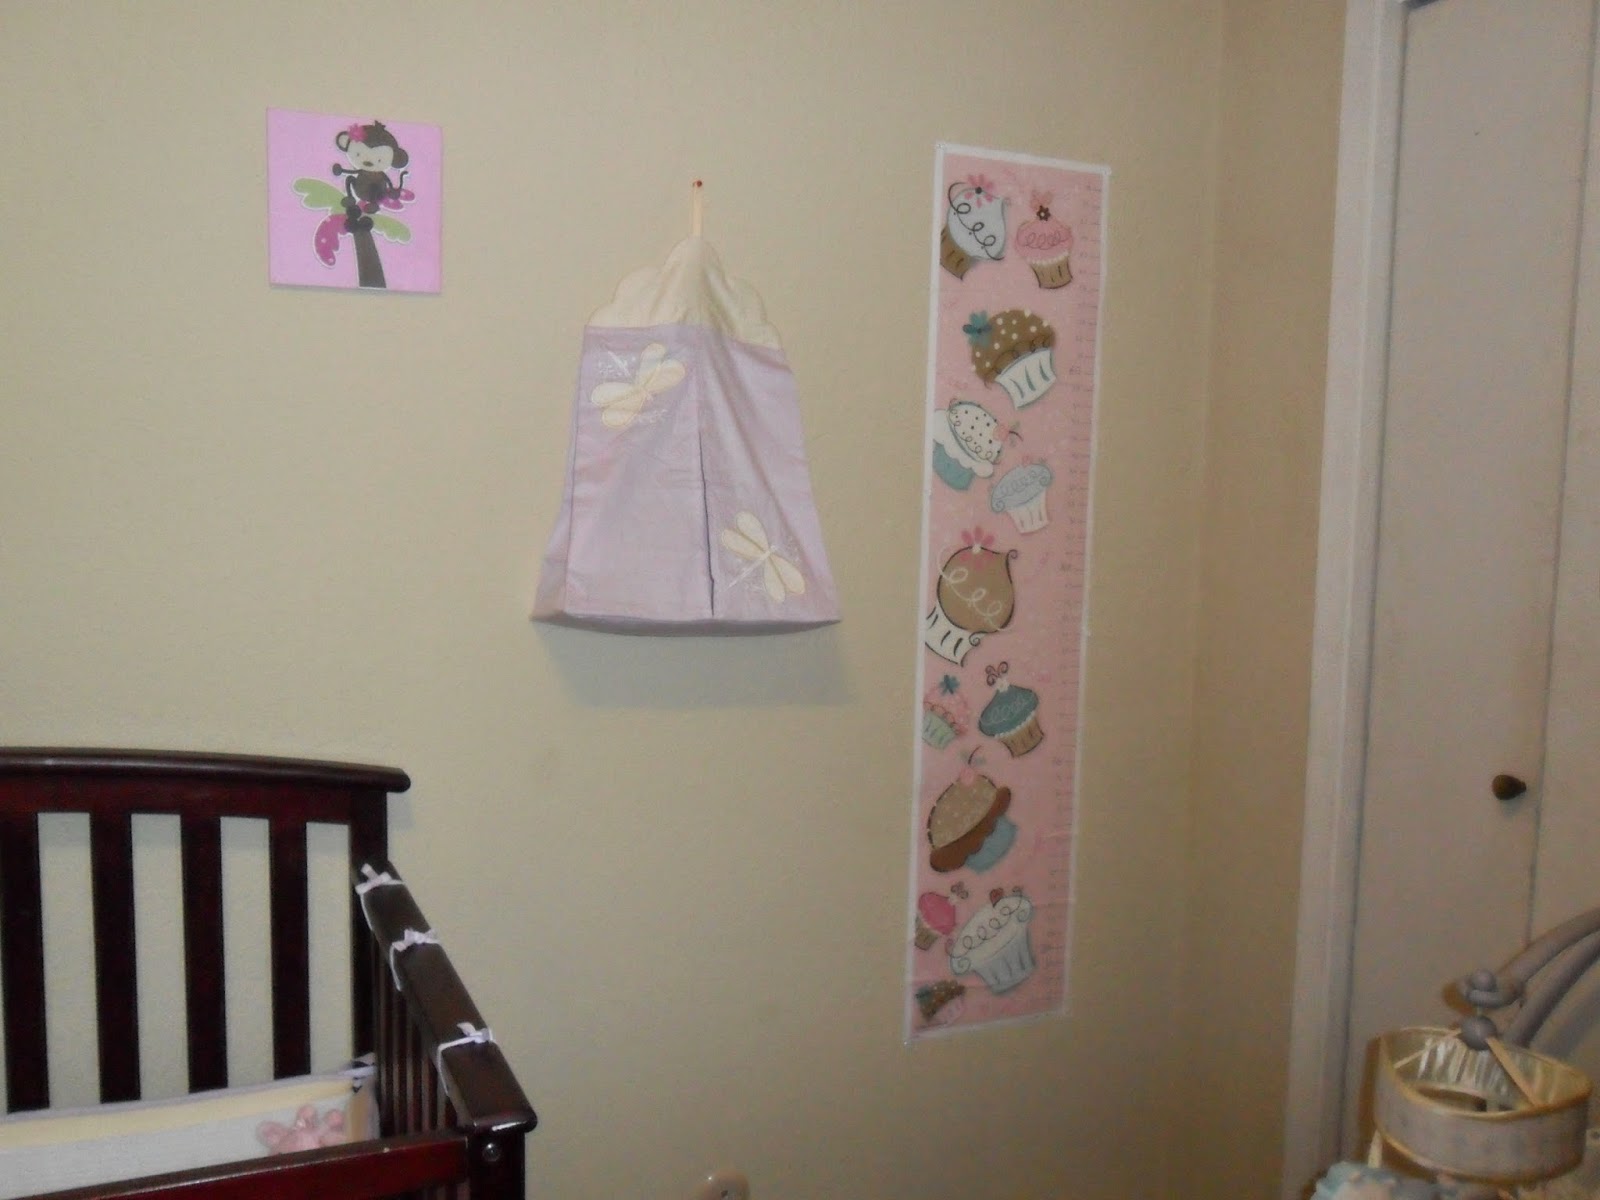 Growth Charts. Canvas Press Review. (Blu me away or Pink of me Event)